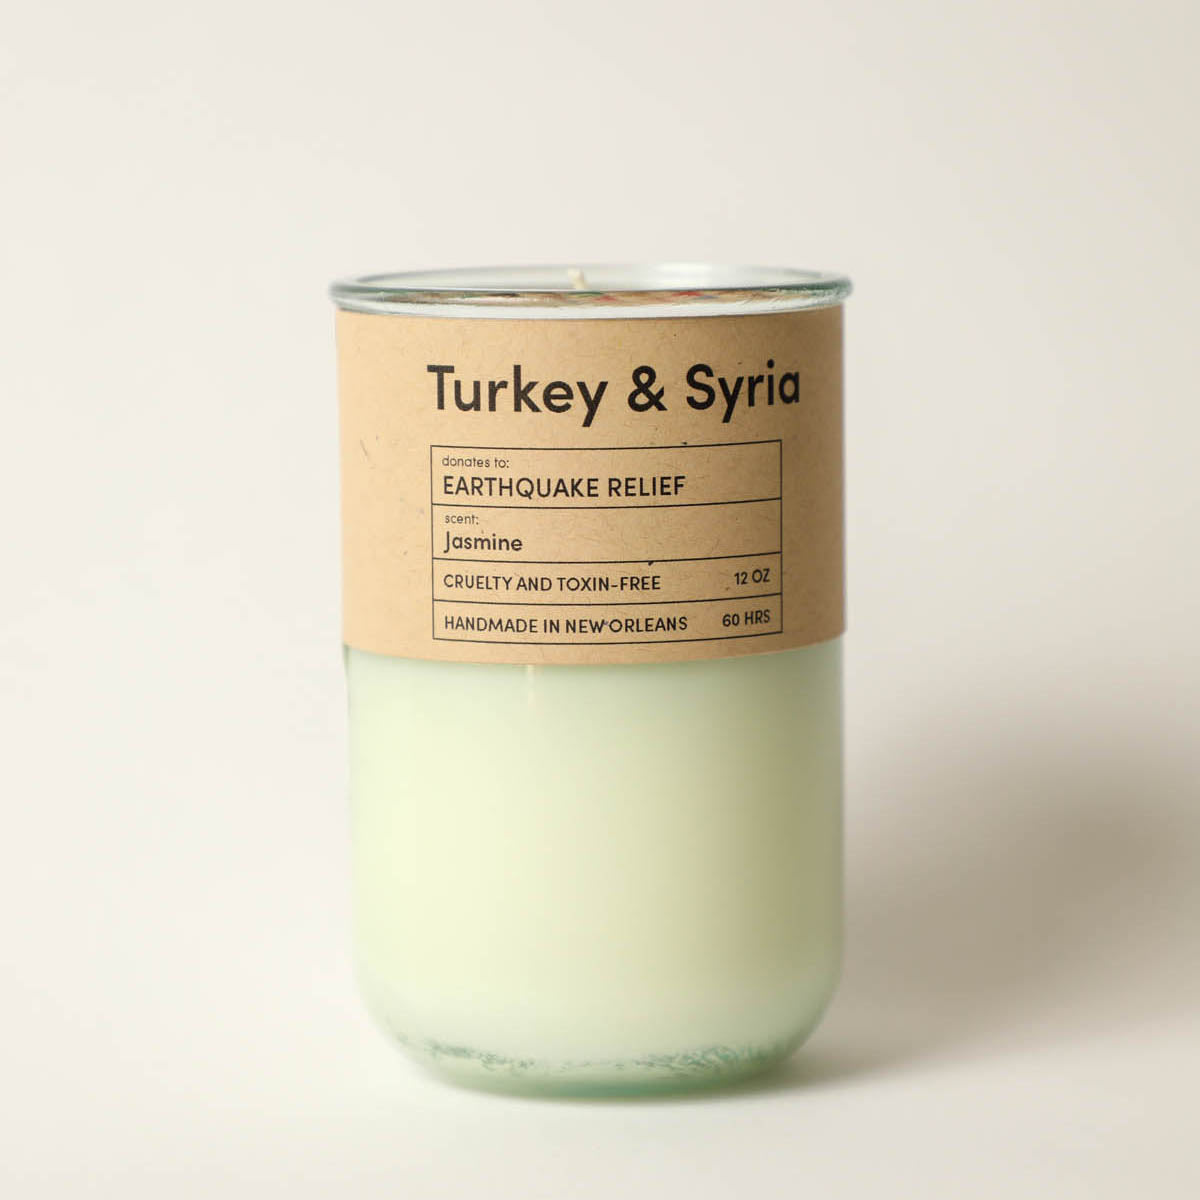 Rebuild, Turkey & Syria Earthquake Relief / Jasmine Scent: Candles for Good